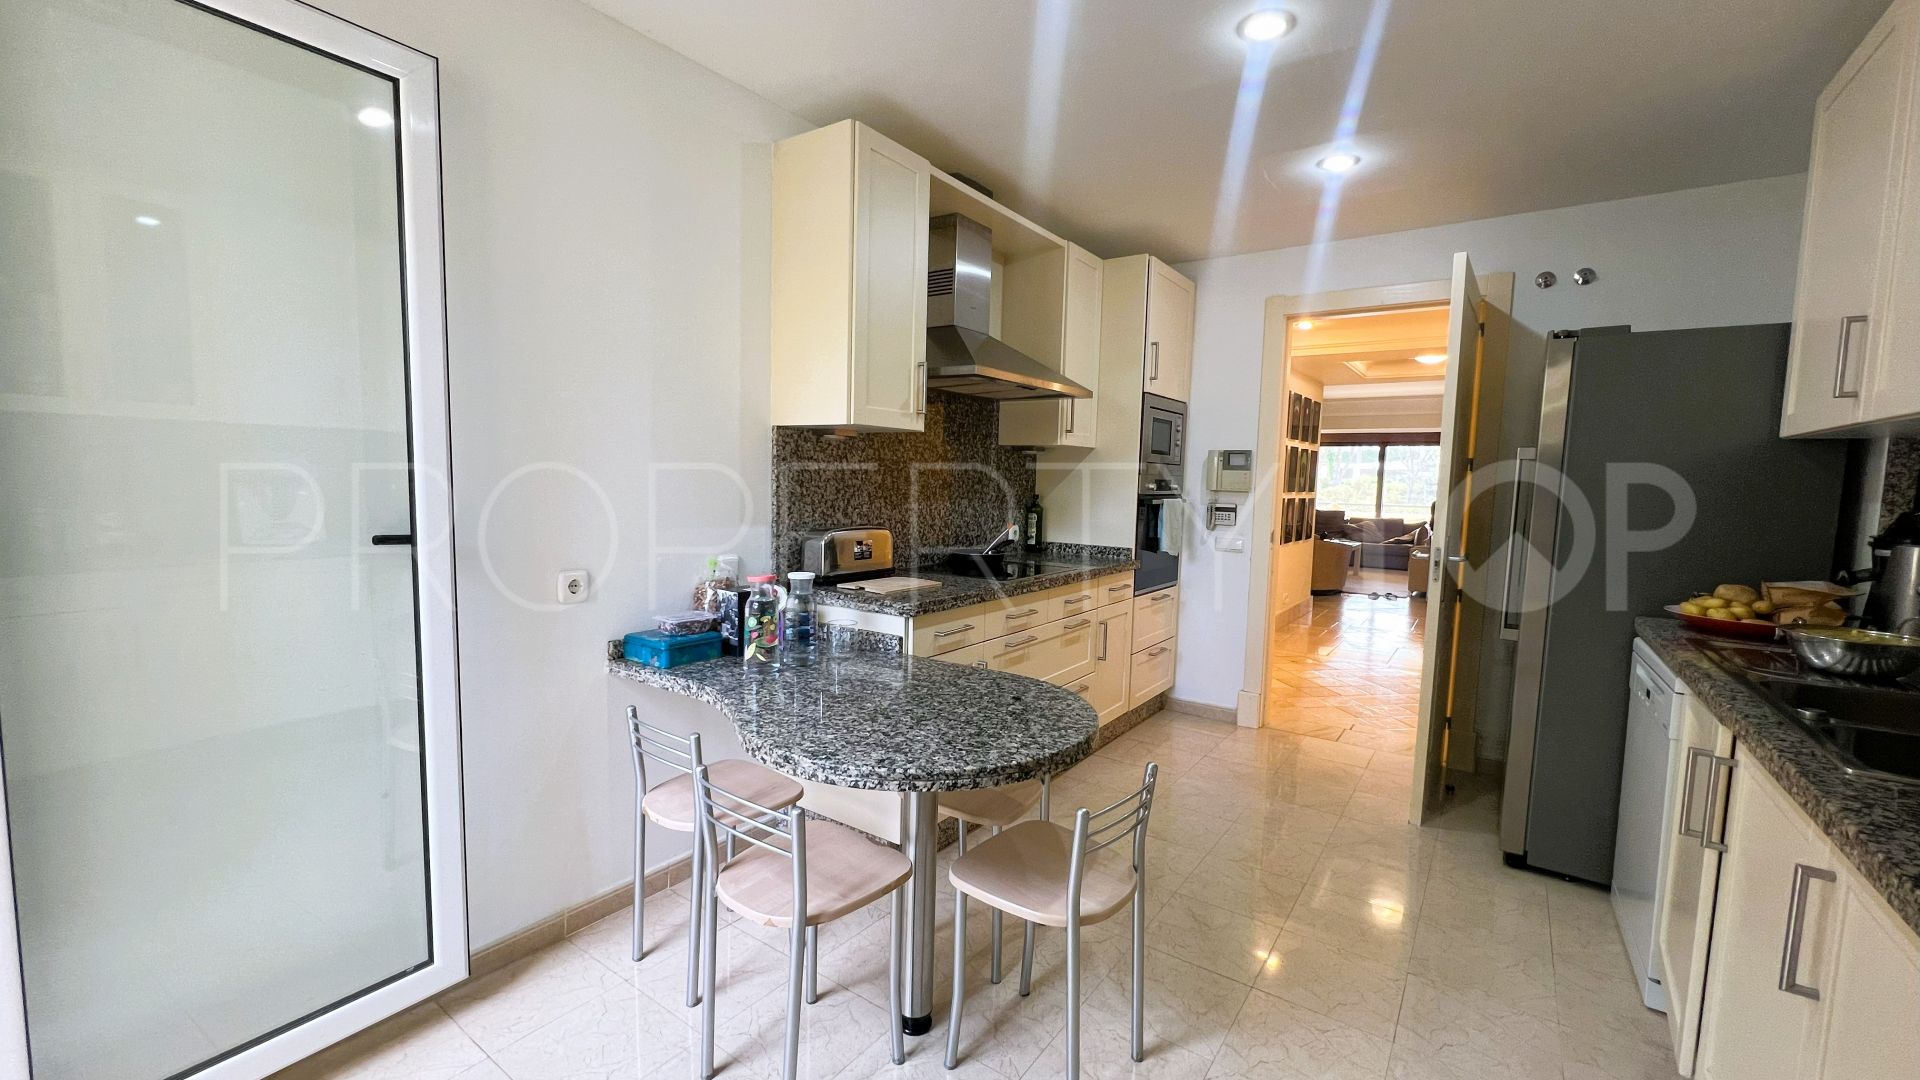 For sale apartment in Valgrande with 3 bedrooms